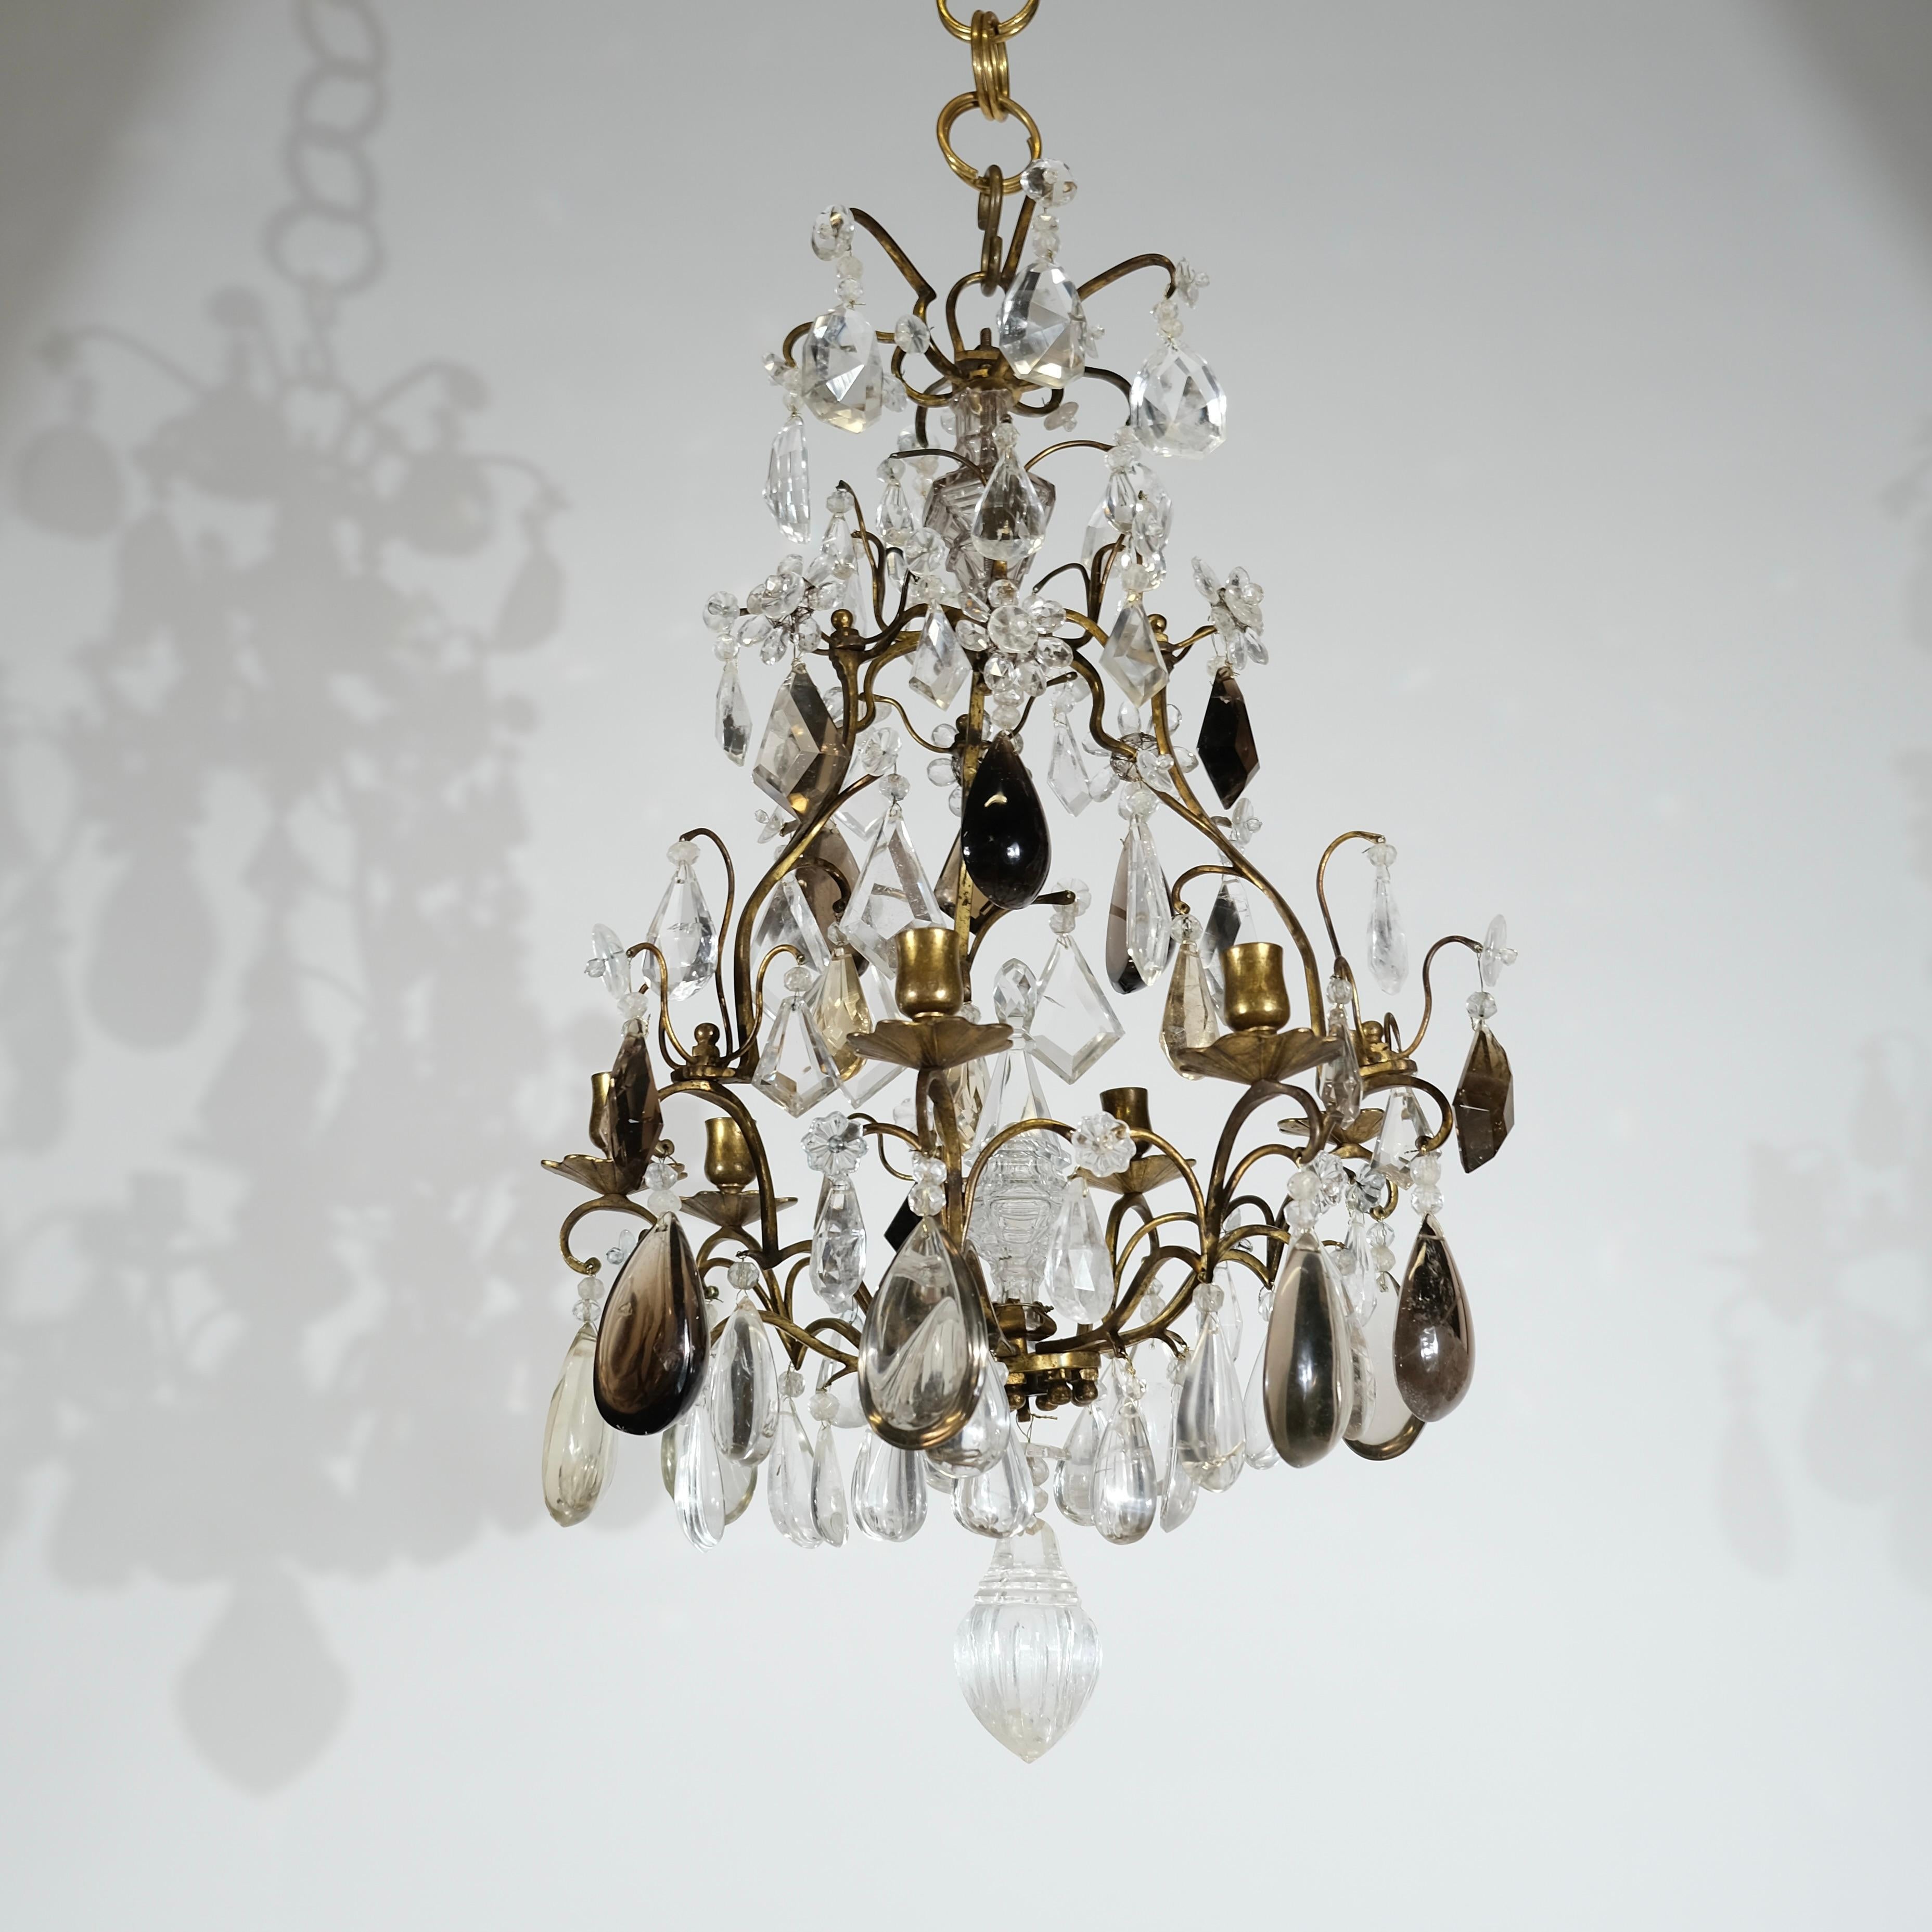 French Small Baroque Style Chandelier with Exquisite Rock Crystals. 19th c.